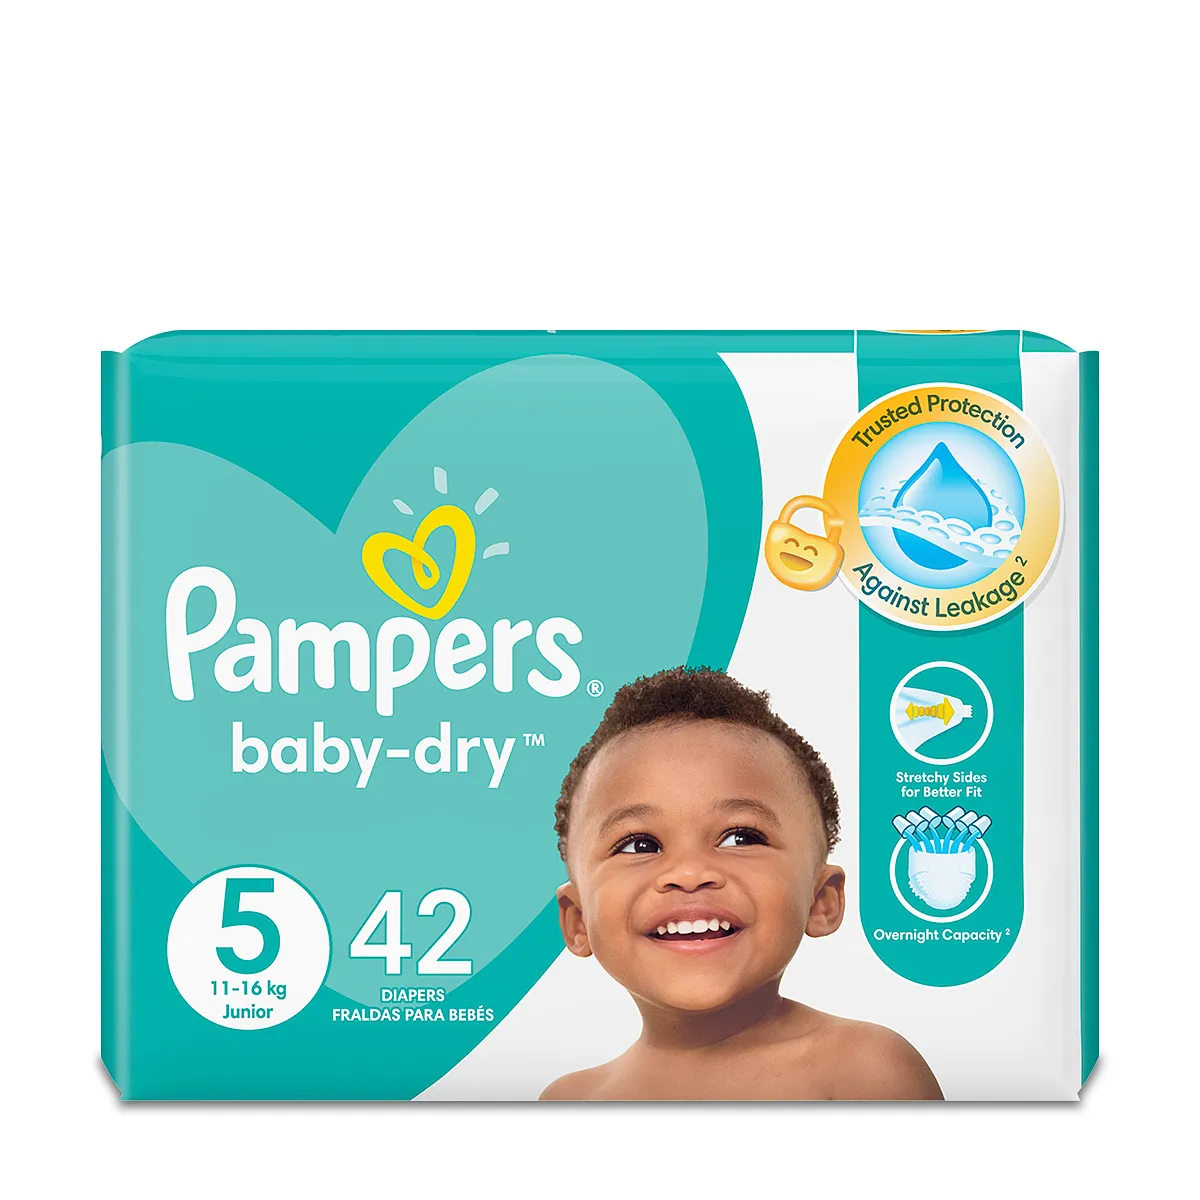 pampers 5 active baby